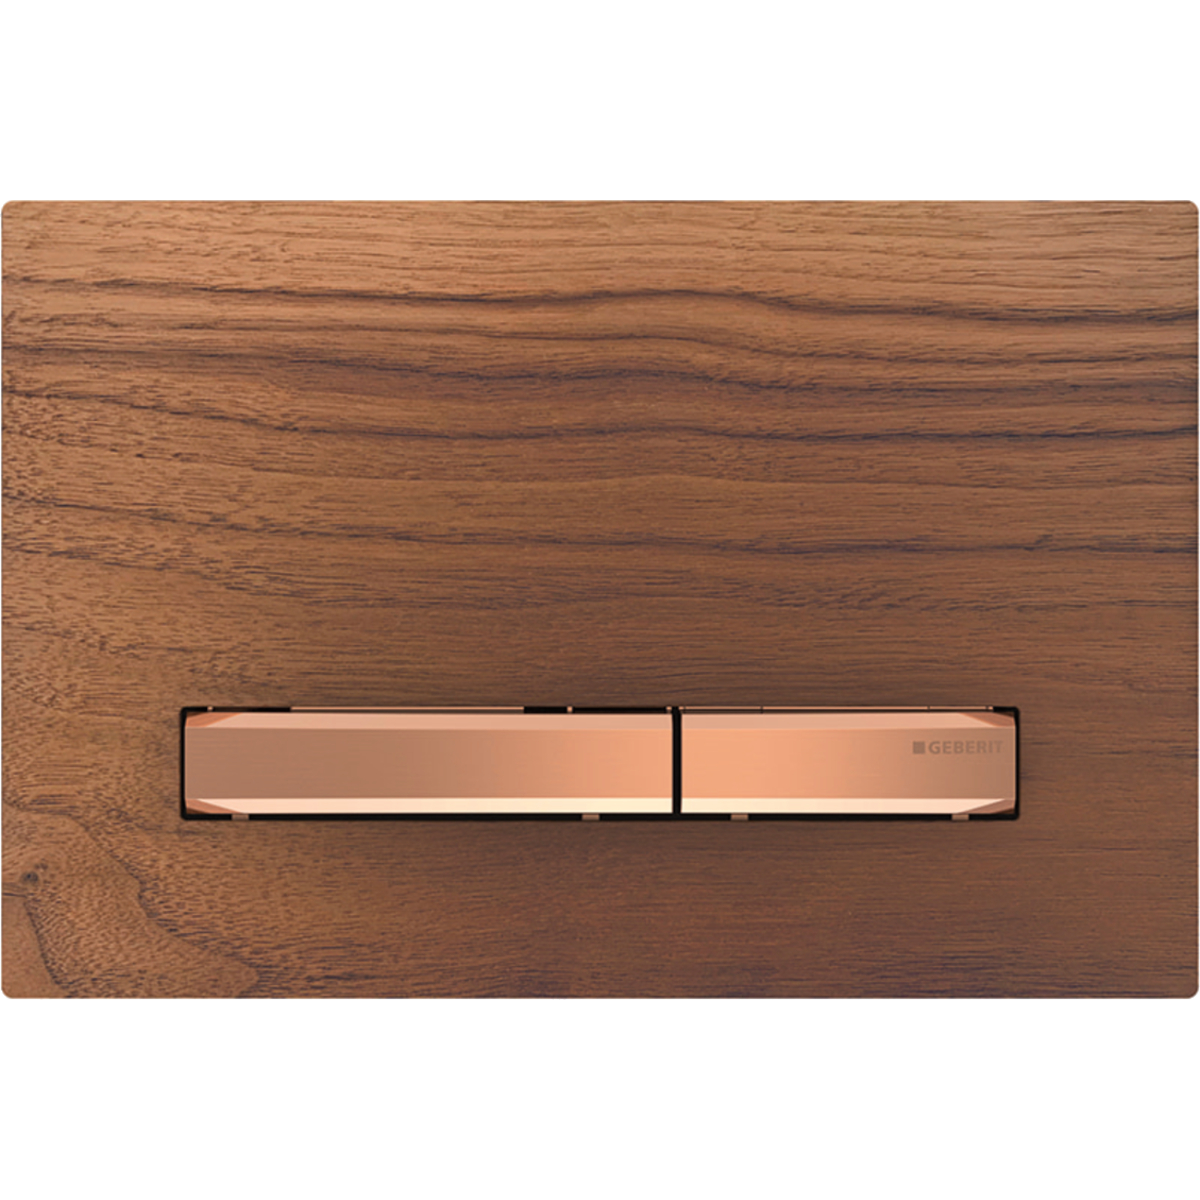 Geberit 115.670.JX.2 Actuator Plate Sigma50 for Dual Flush, Metal Colour Red Gold - Base Plate and Buttons: Red Gold/Cover Plate: Black Walnut